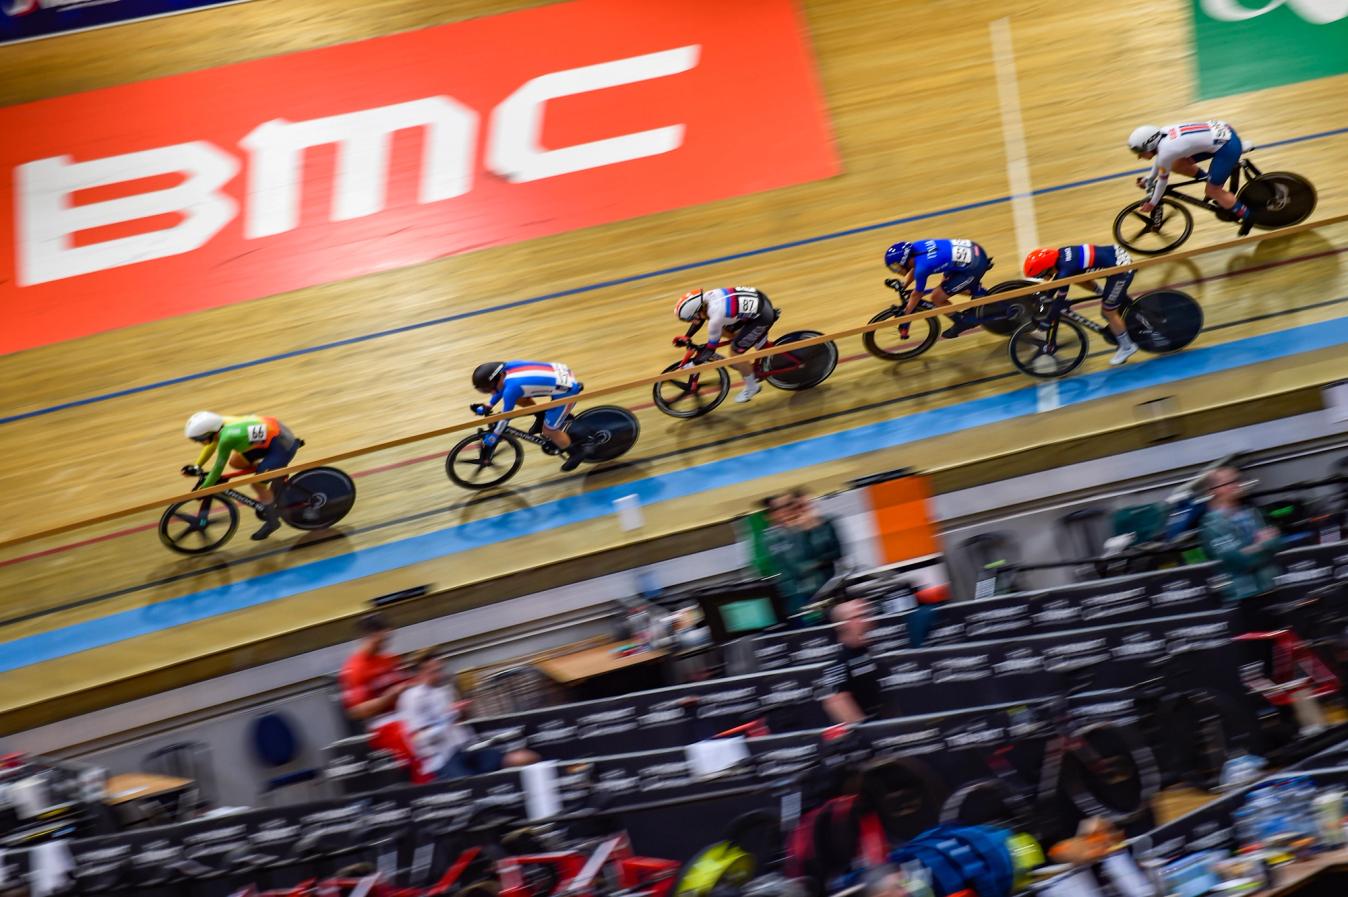 The Sir Chris Hoy Velodrome will host a week of fast and furious track racing